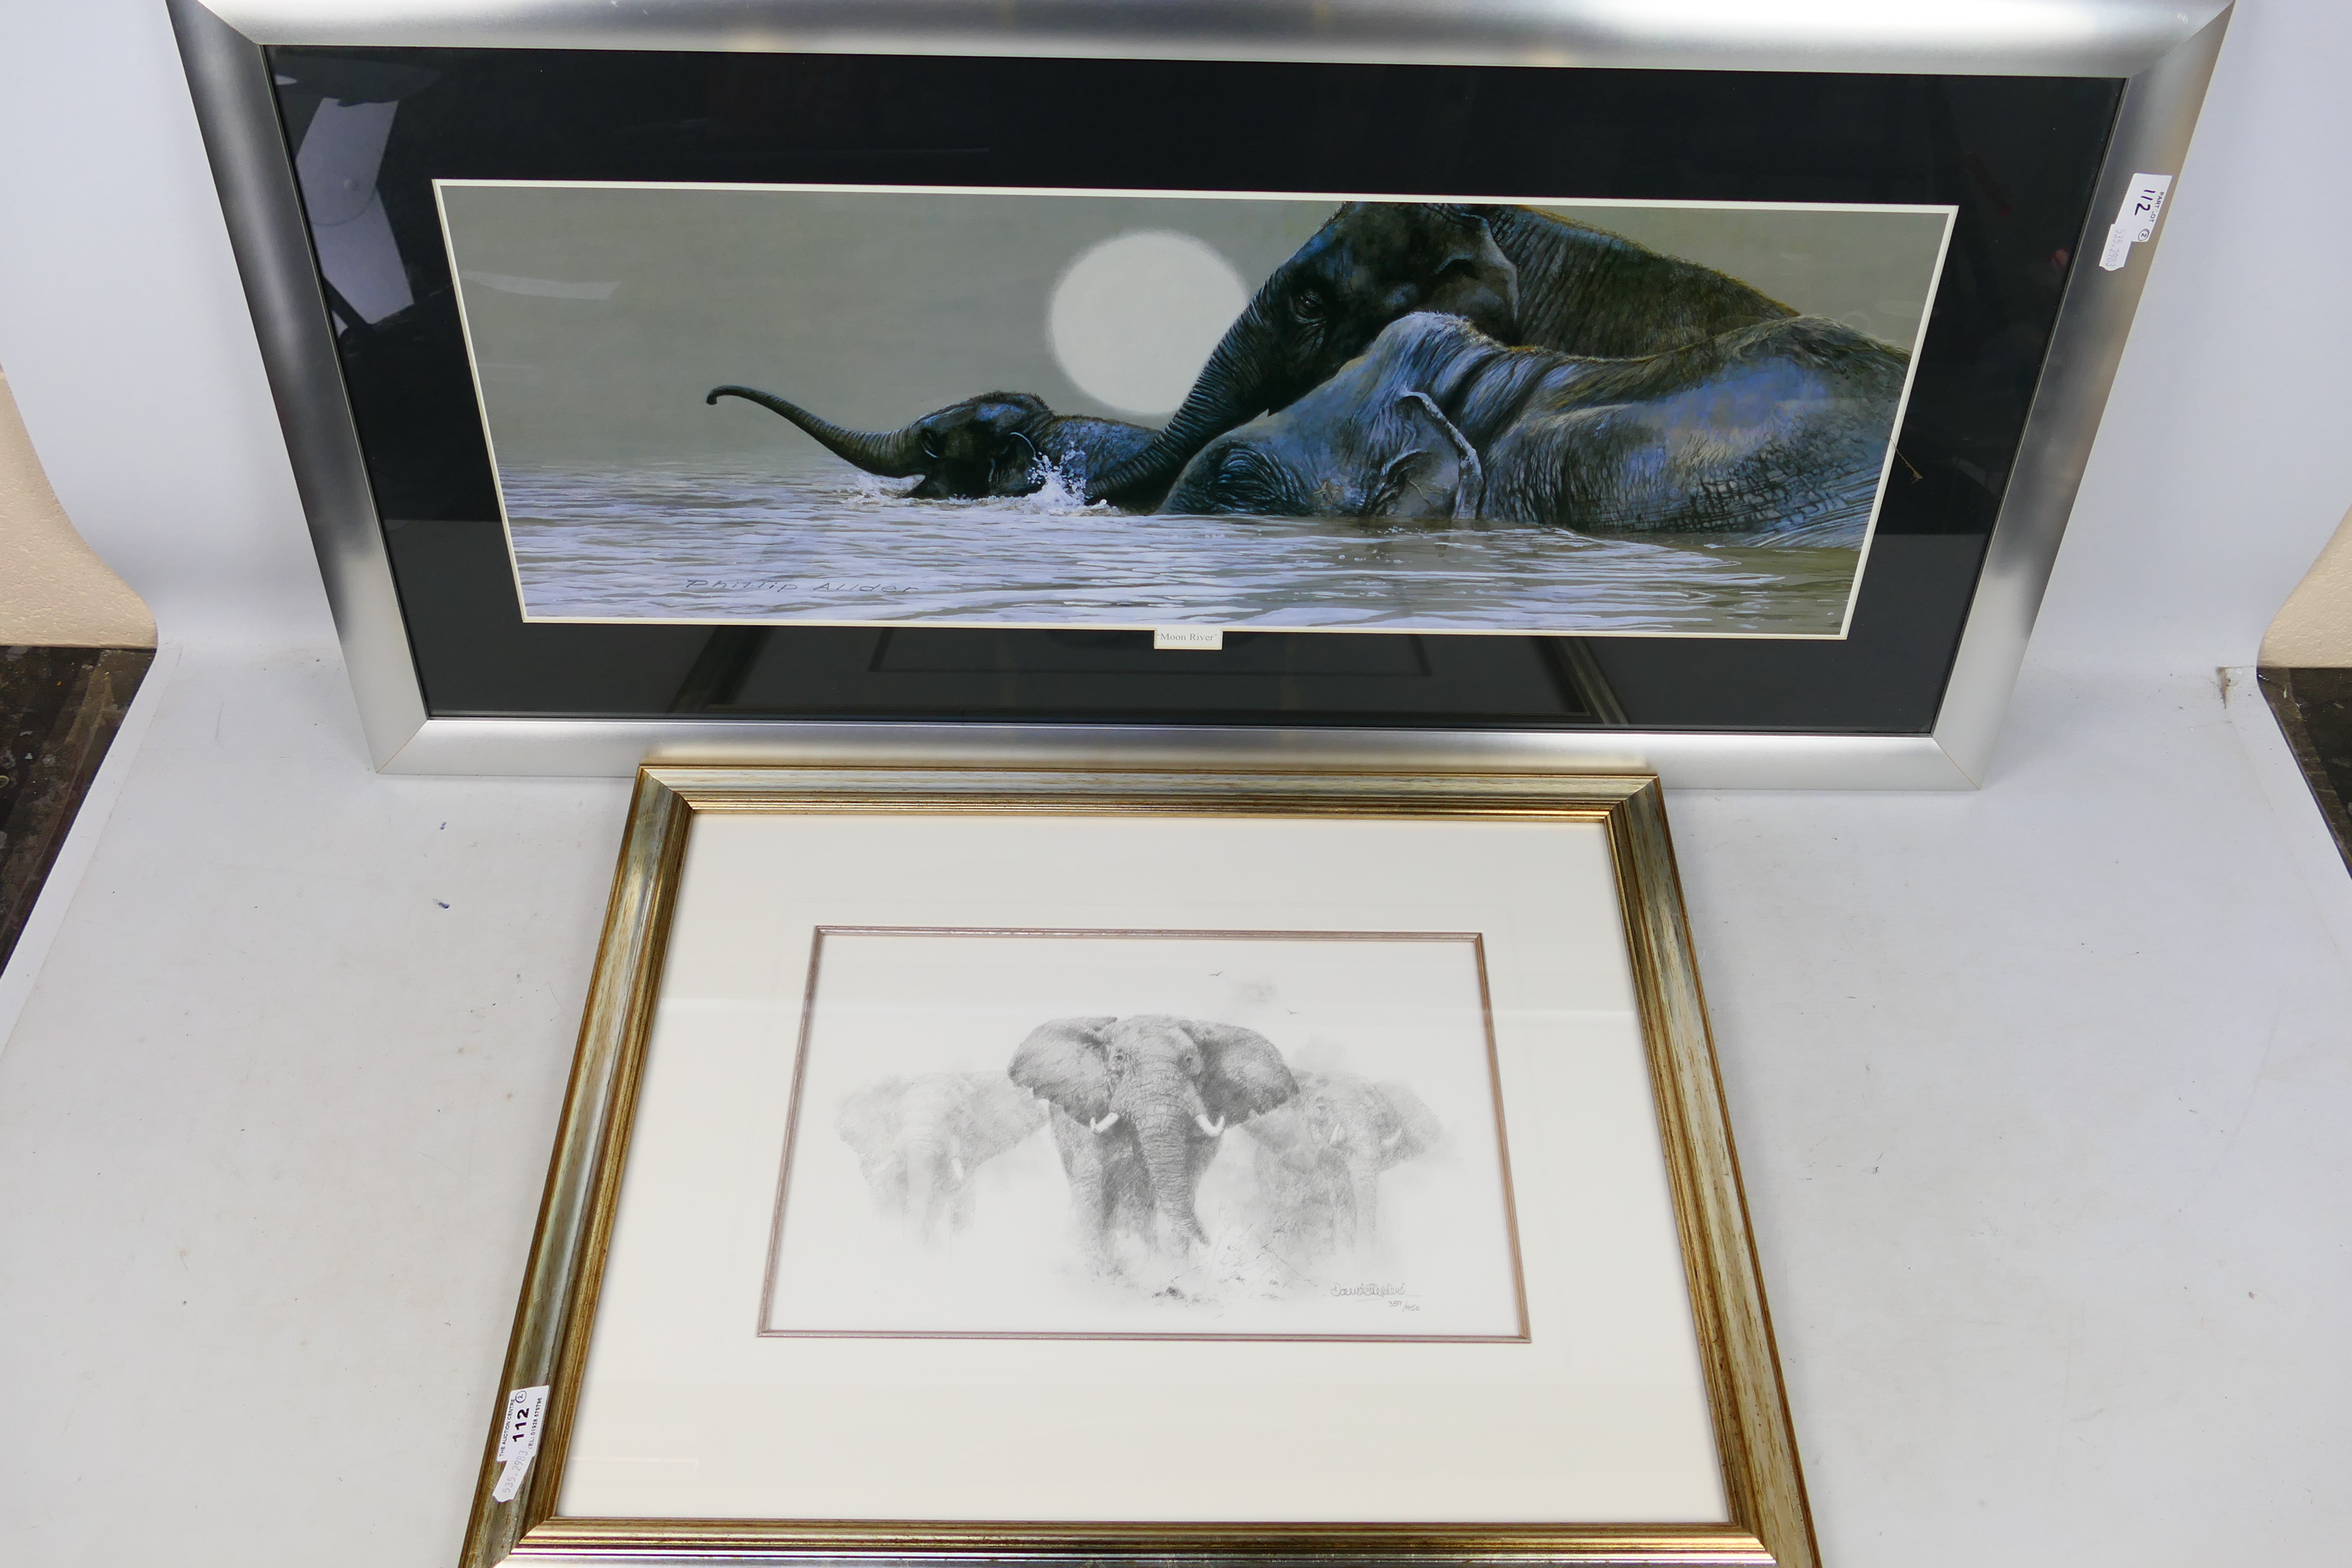 Two framed prints comprising Elephants by David Shepherd issued in a limited edition of 950,